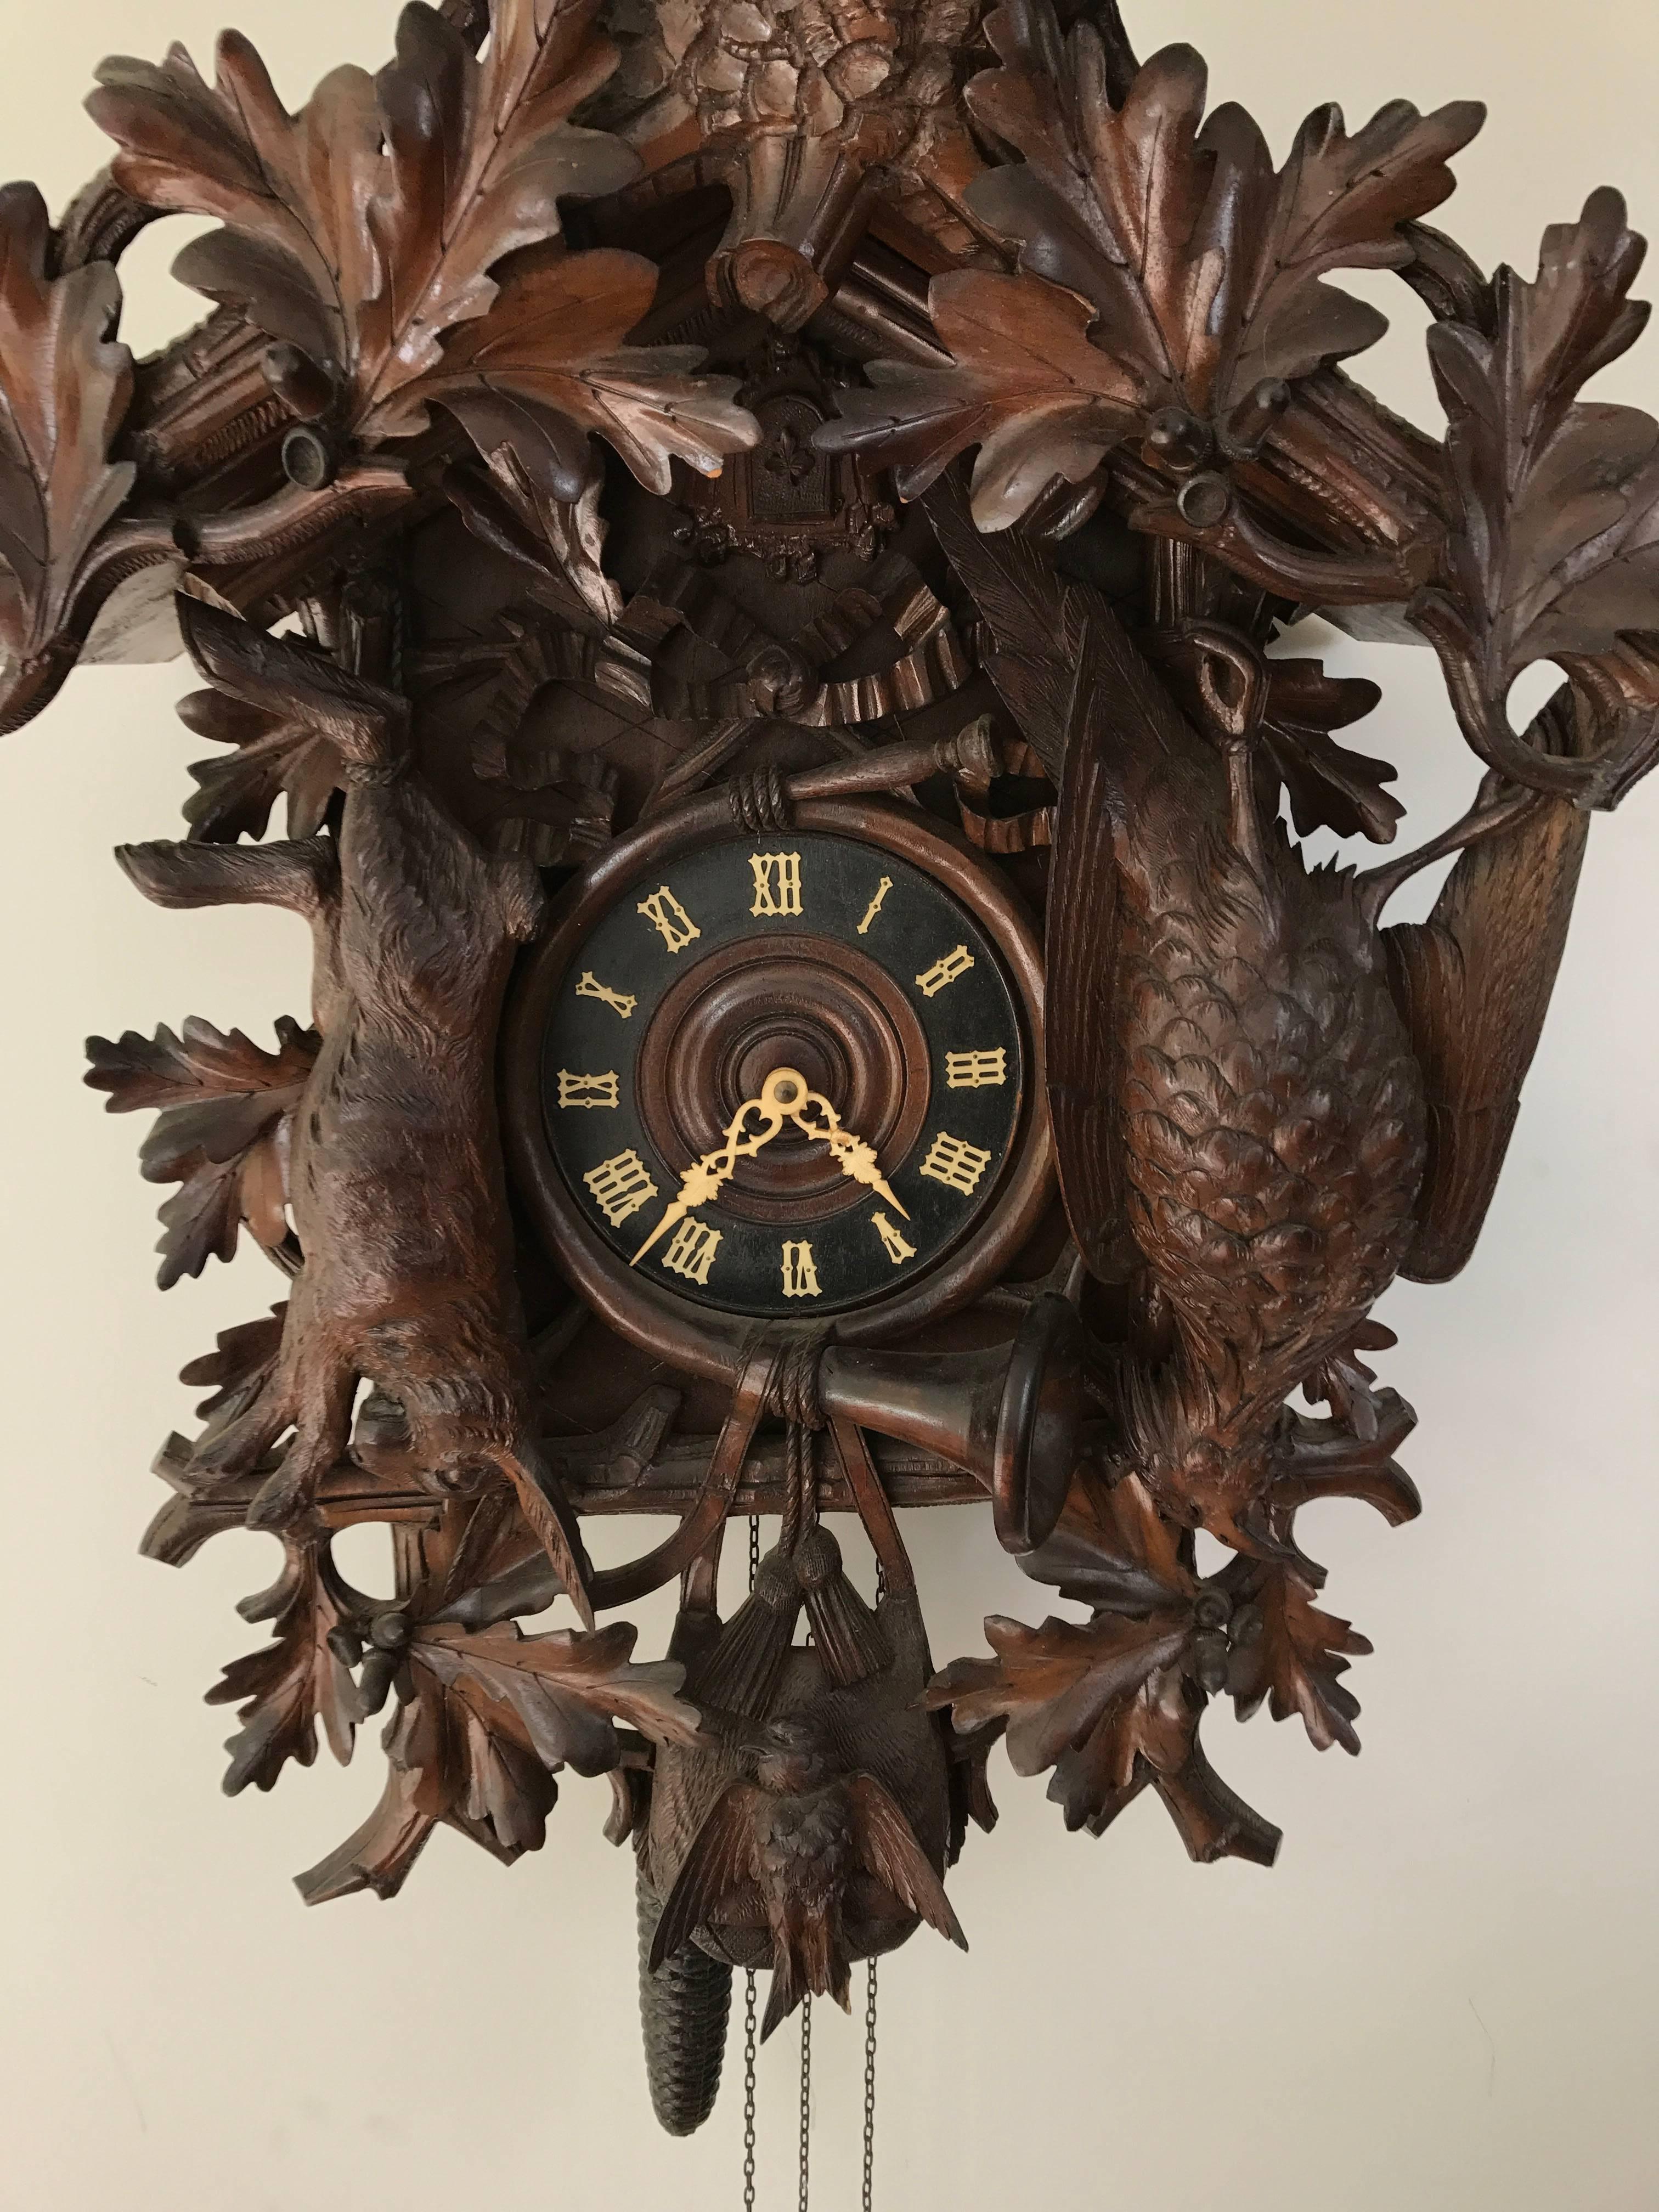 Rare and unusual large-scale Black Forest carved cuckoo clock. Elaborately detailed game decoration topped with an eagle.